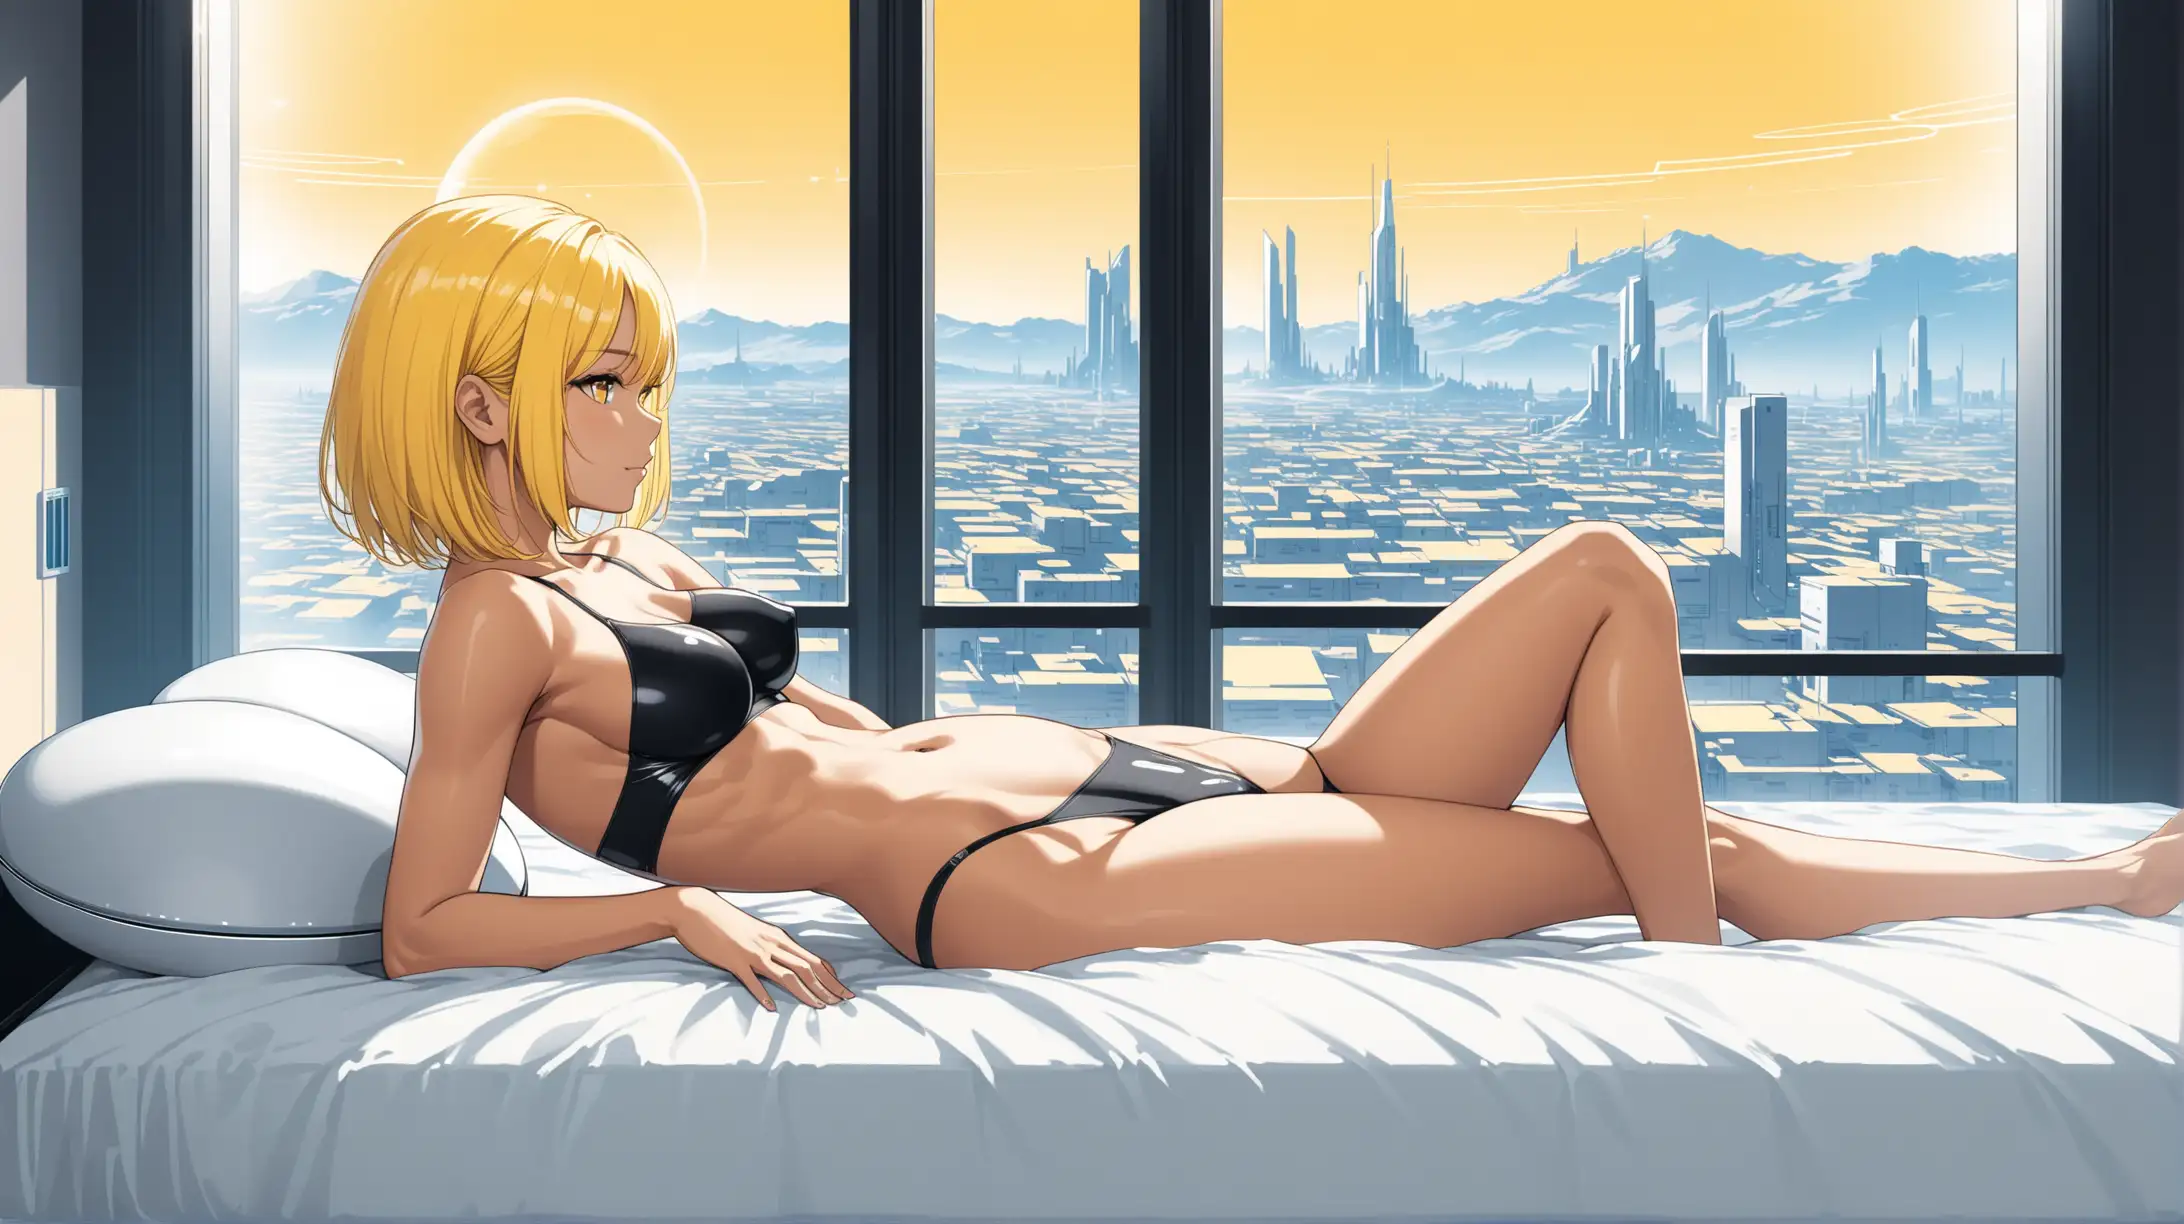 Futuristic Apartment Relaxation YellowHaired Heroine in Minimal Style